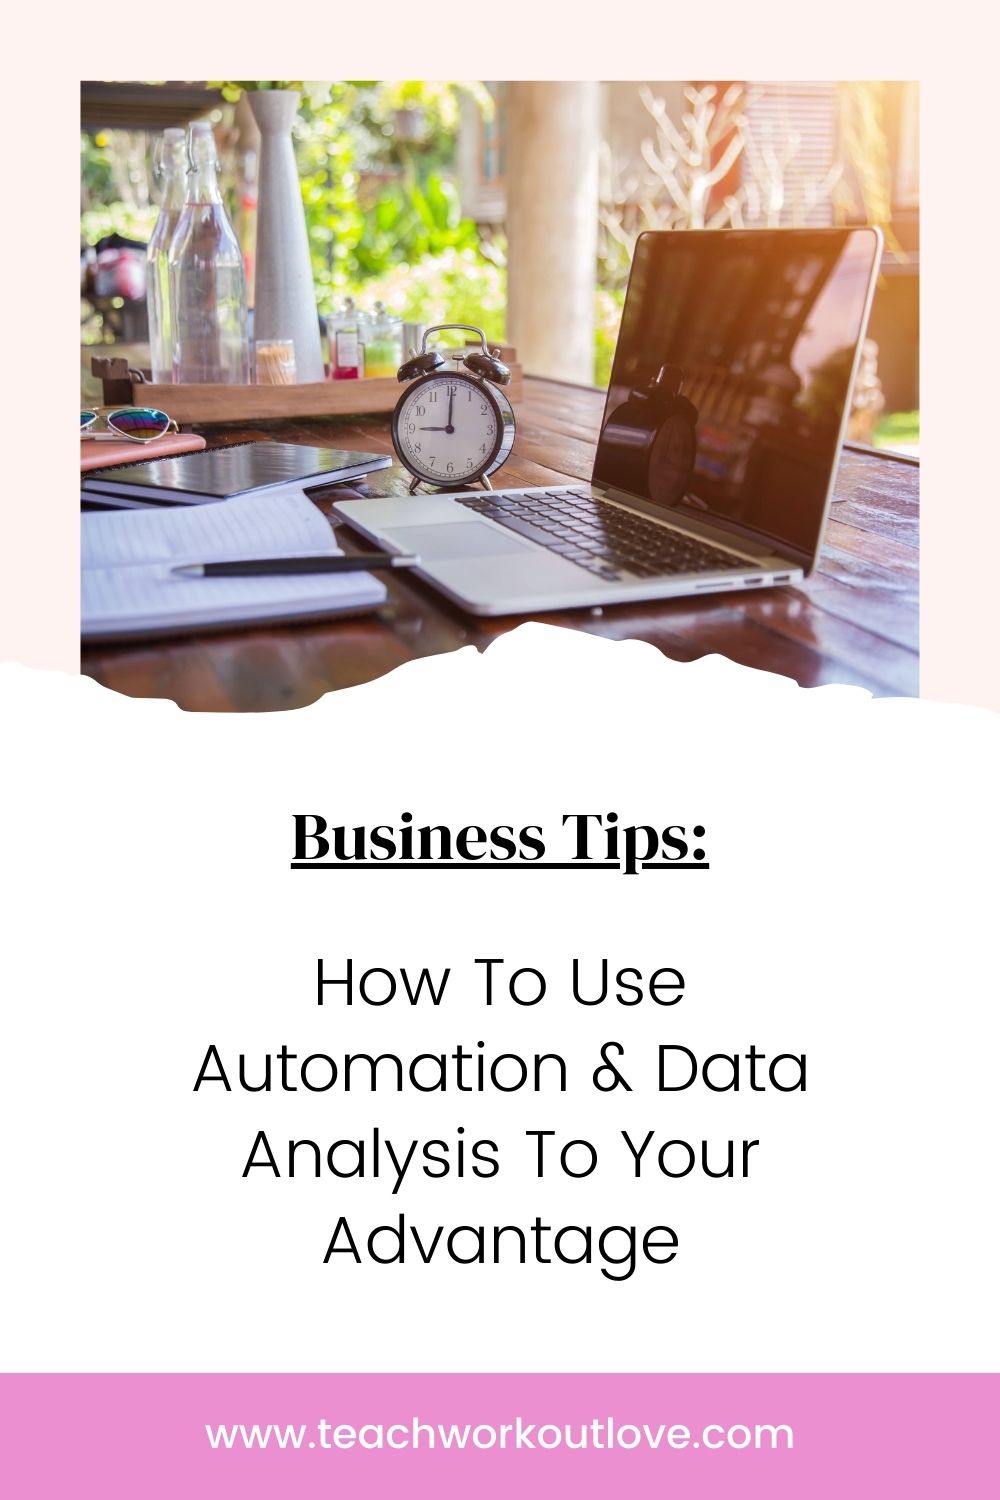 Rational analysis of data involves analyzing data from various sources in order to gain insights about the current state of a business or market trend. This article will provide an overview of how businesses can use automation and rational analysis of data for their benefit.